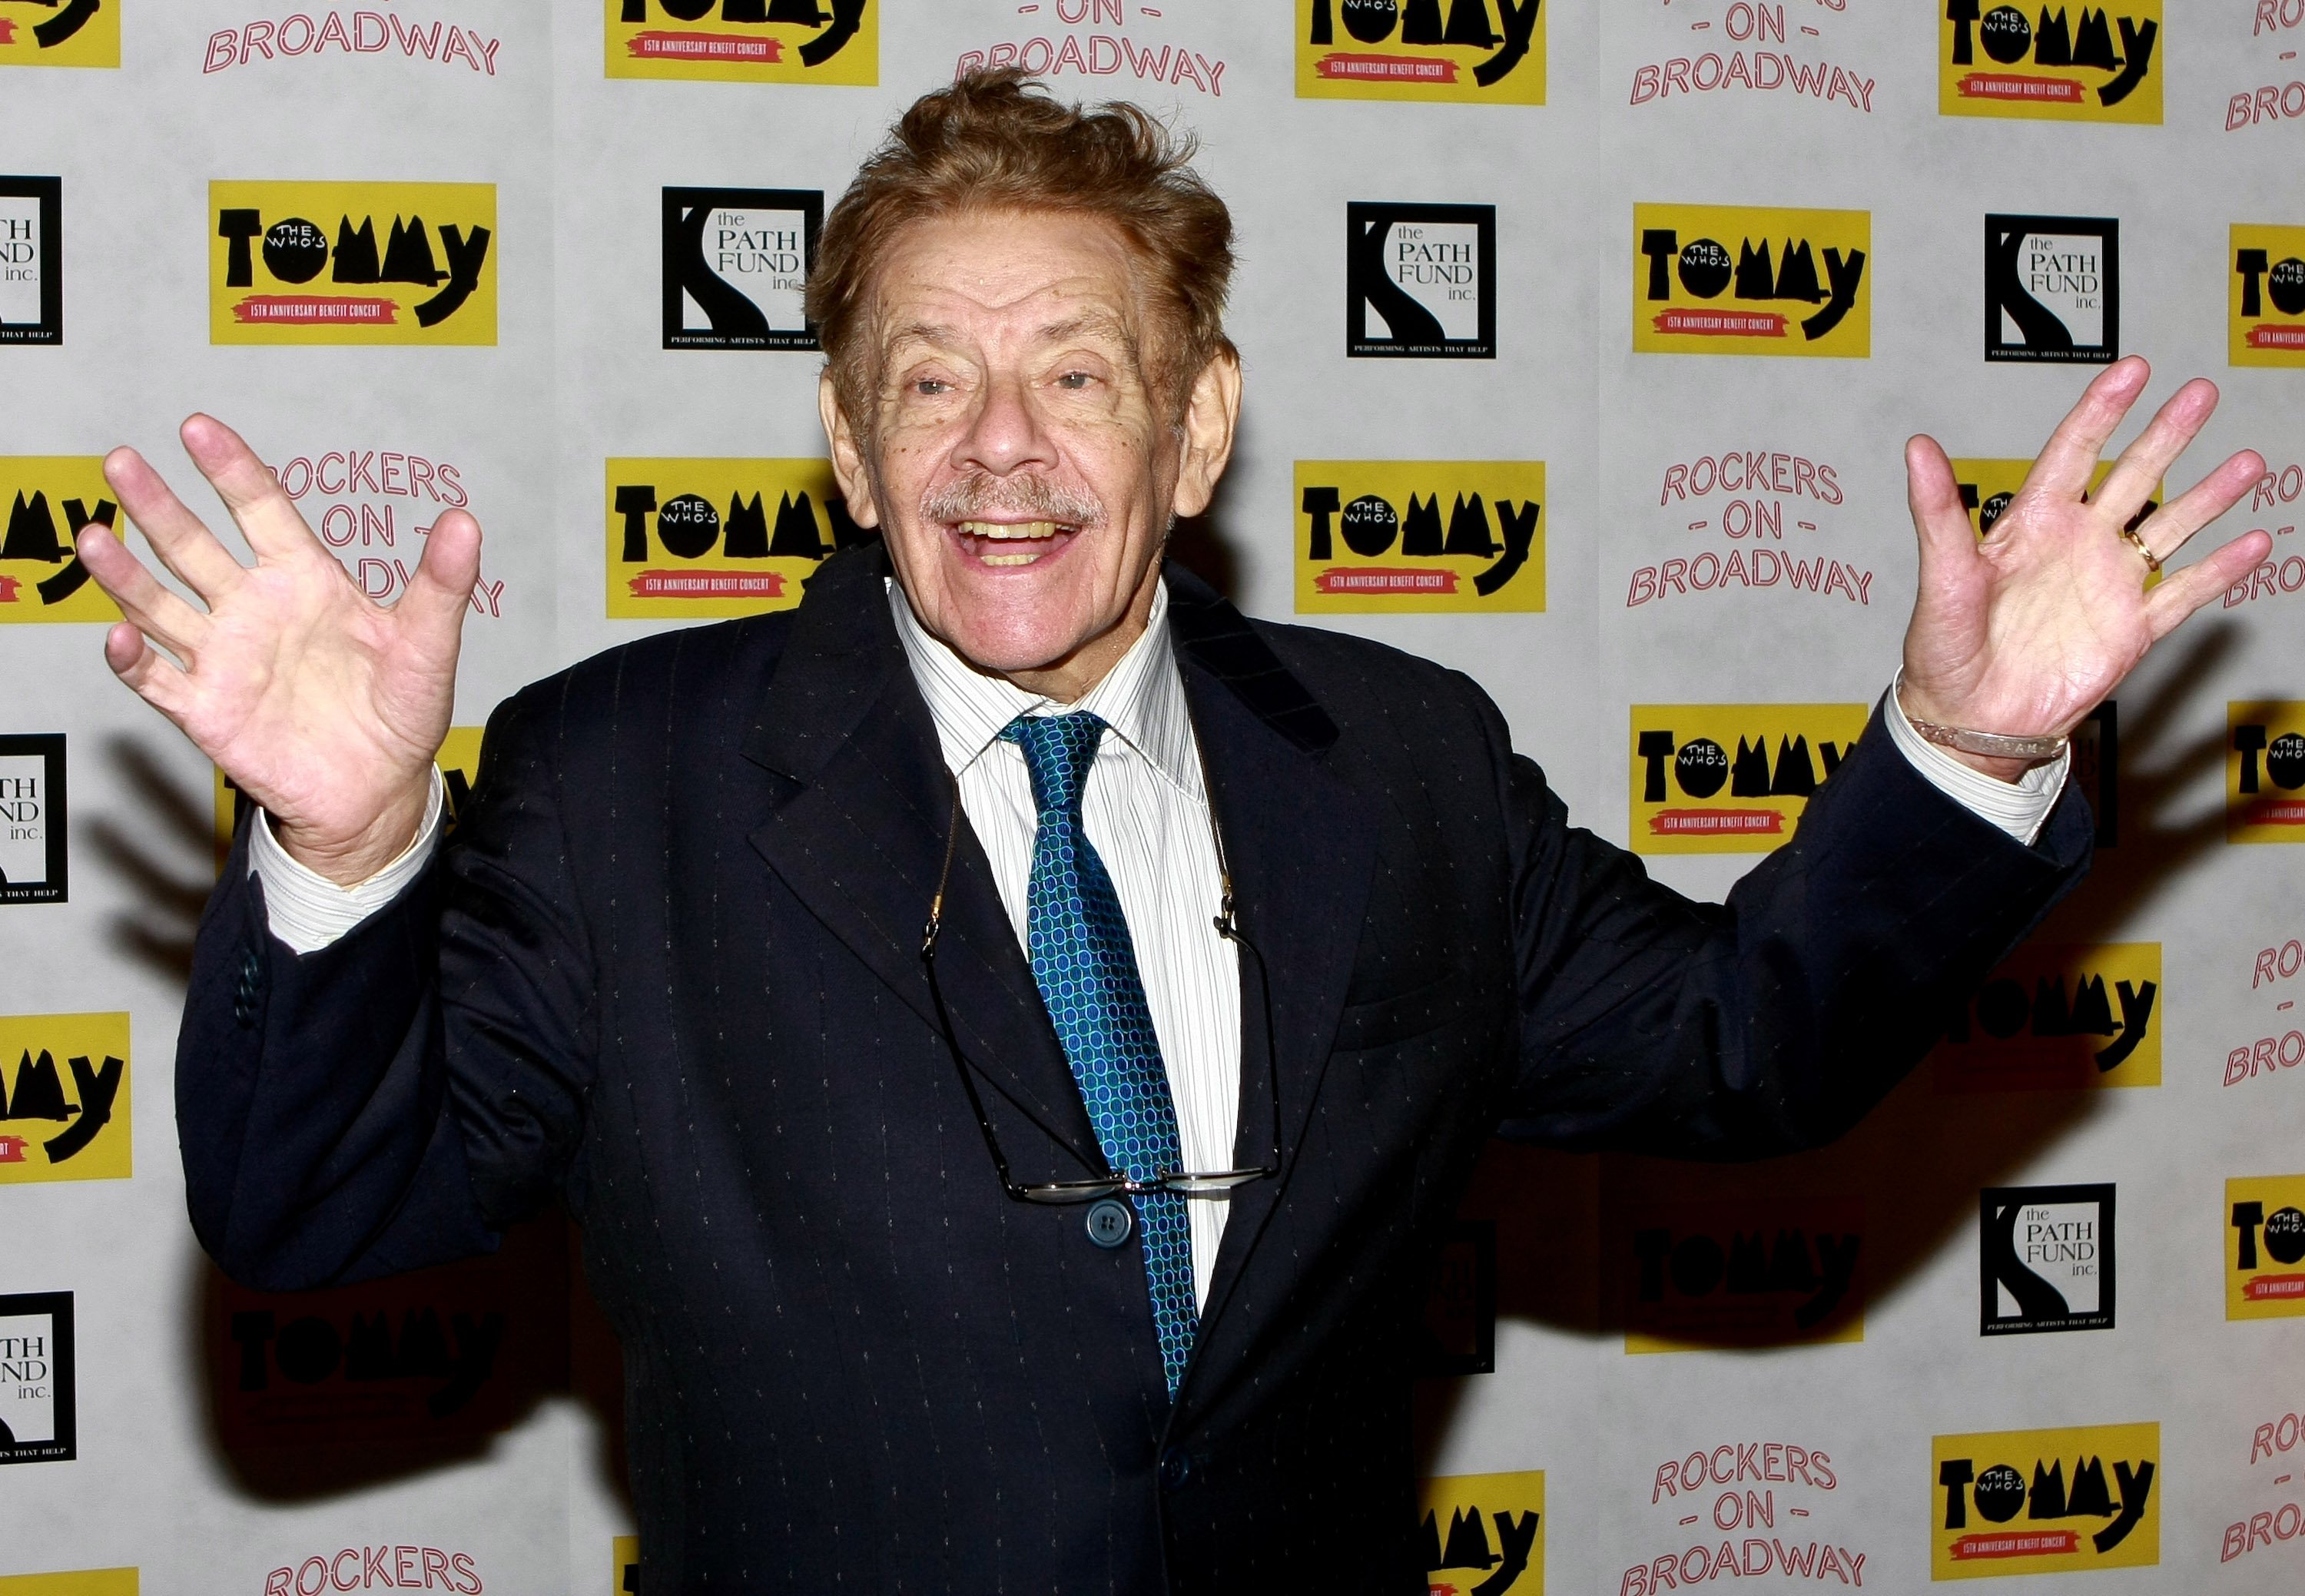 Jerry Stiller at "The Who's Tommy" 15th Anniversary Concert at the August Wilson Theatre in New York City | Photo: Mike Coppola/WireImage via Getty Images